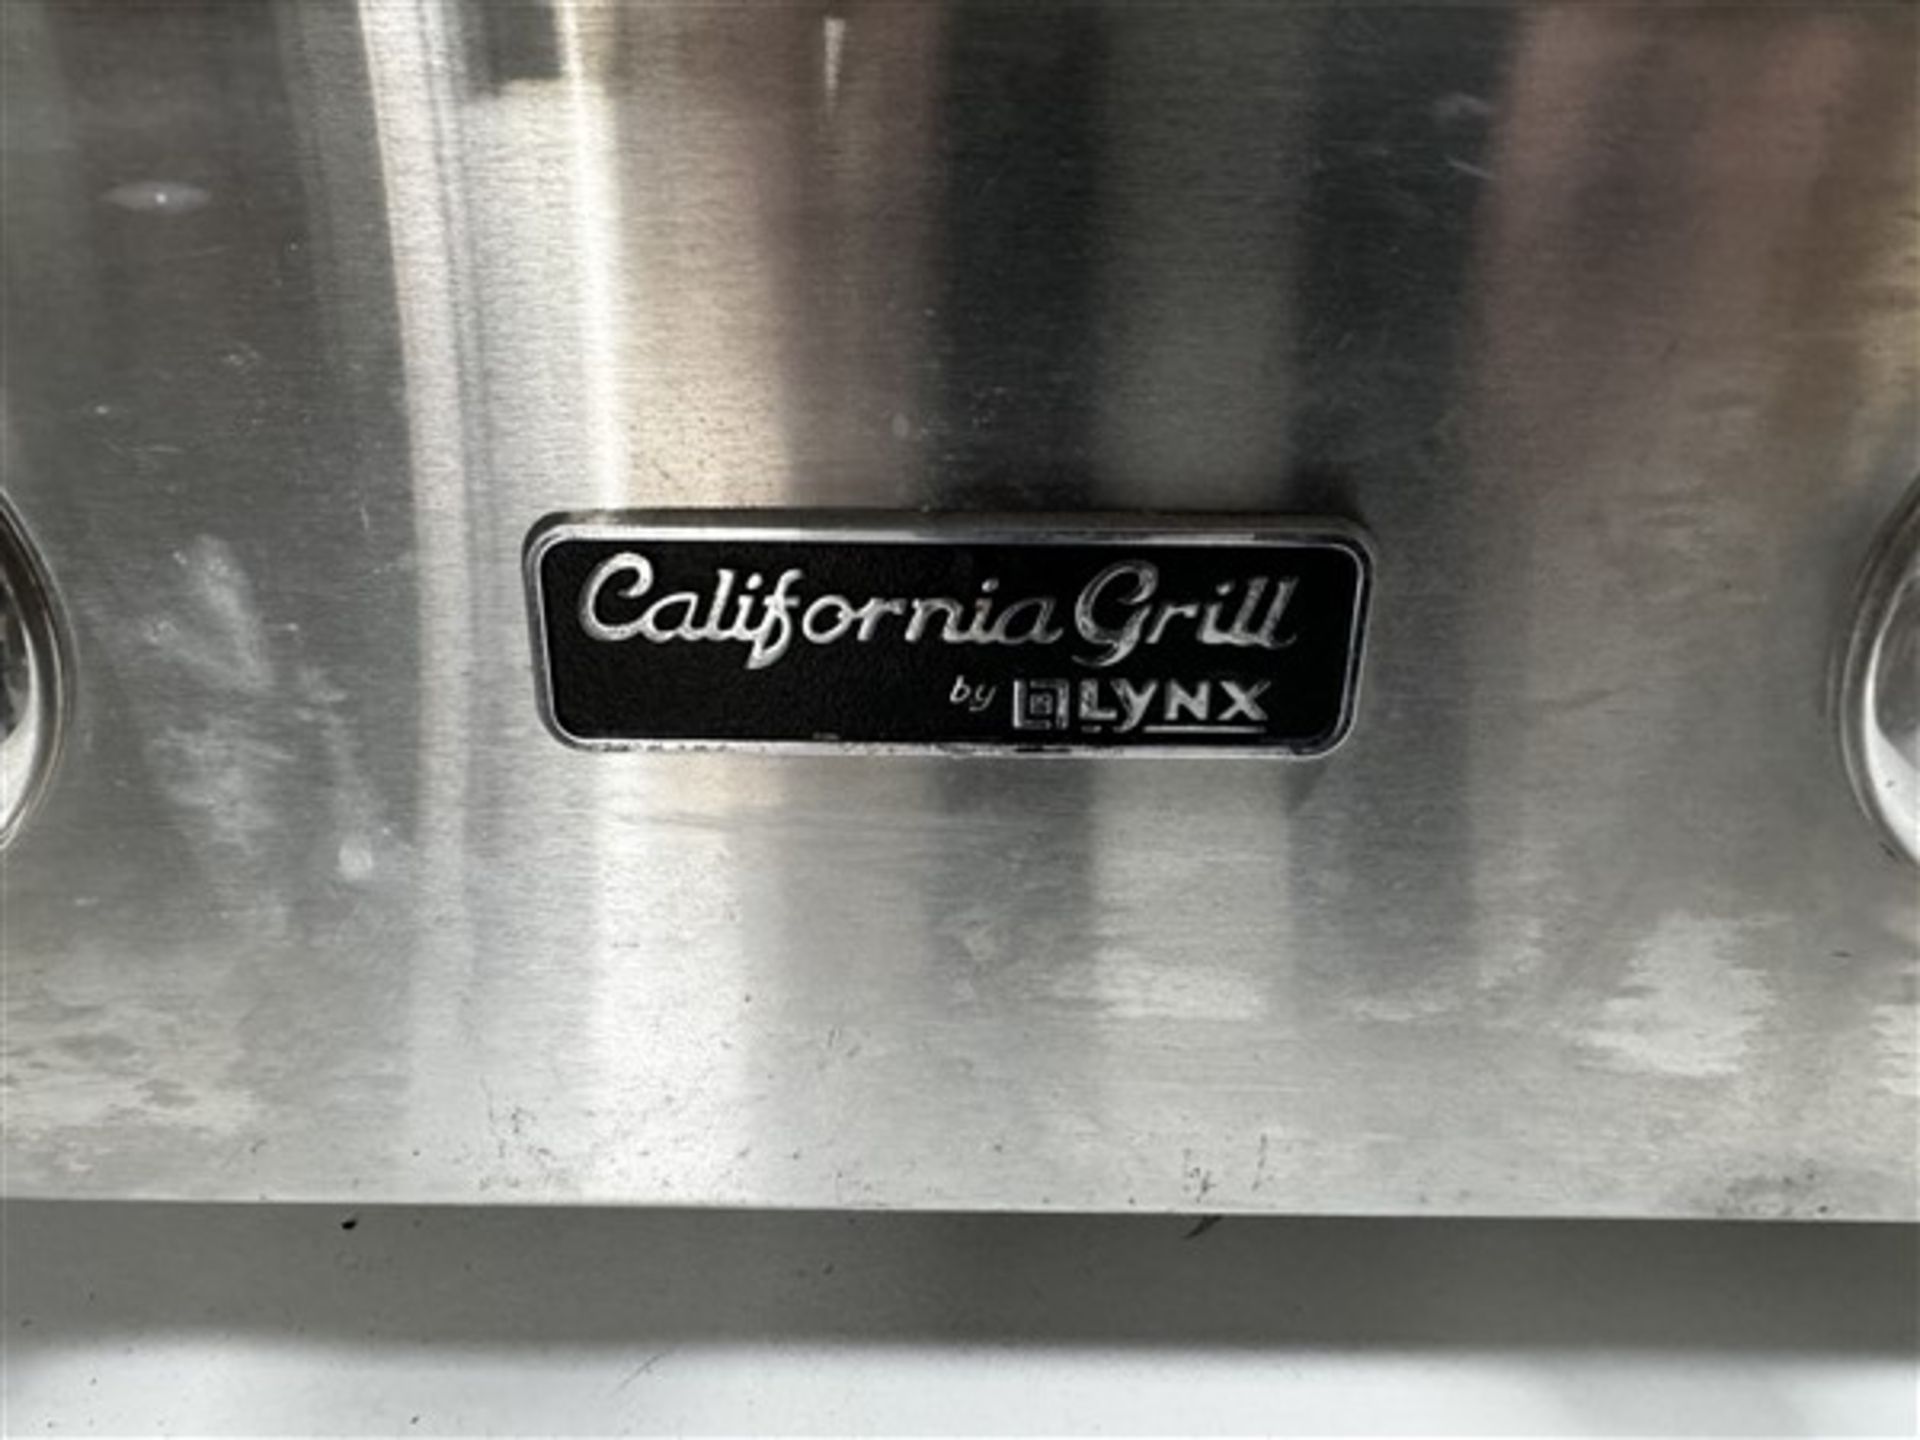 Lynx 'California Grill' gas fired BBQ (working condition unknown, works required) - Image 4 of 6